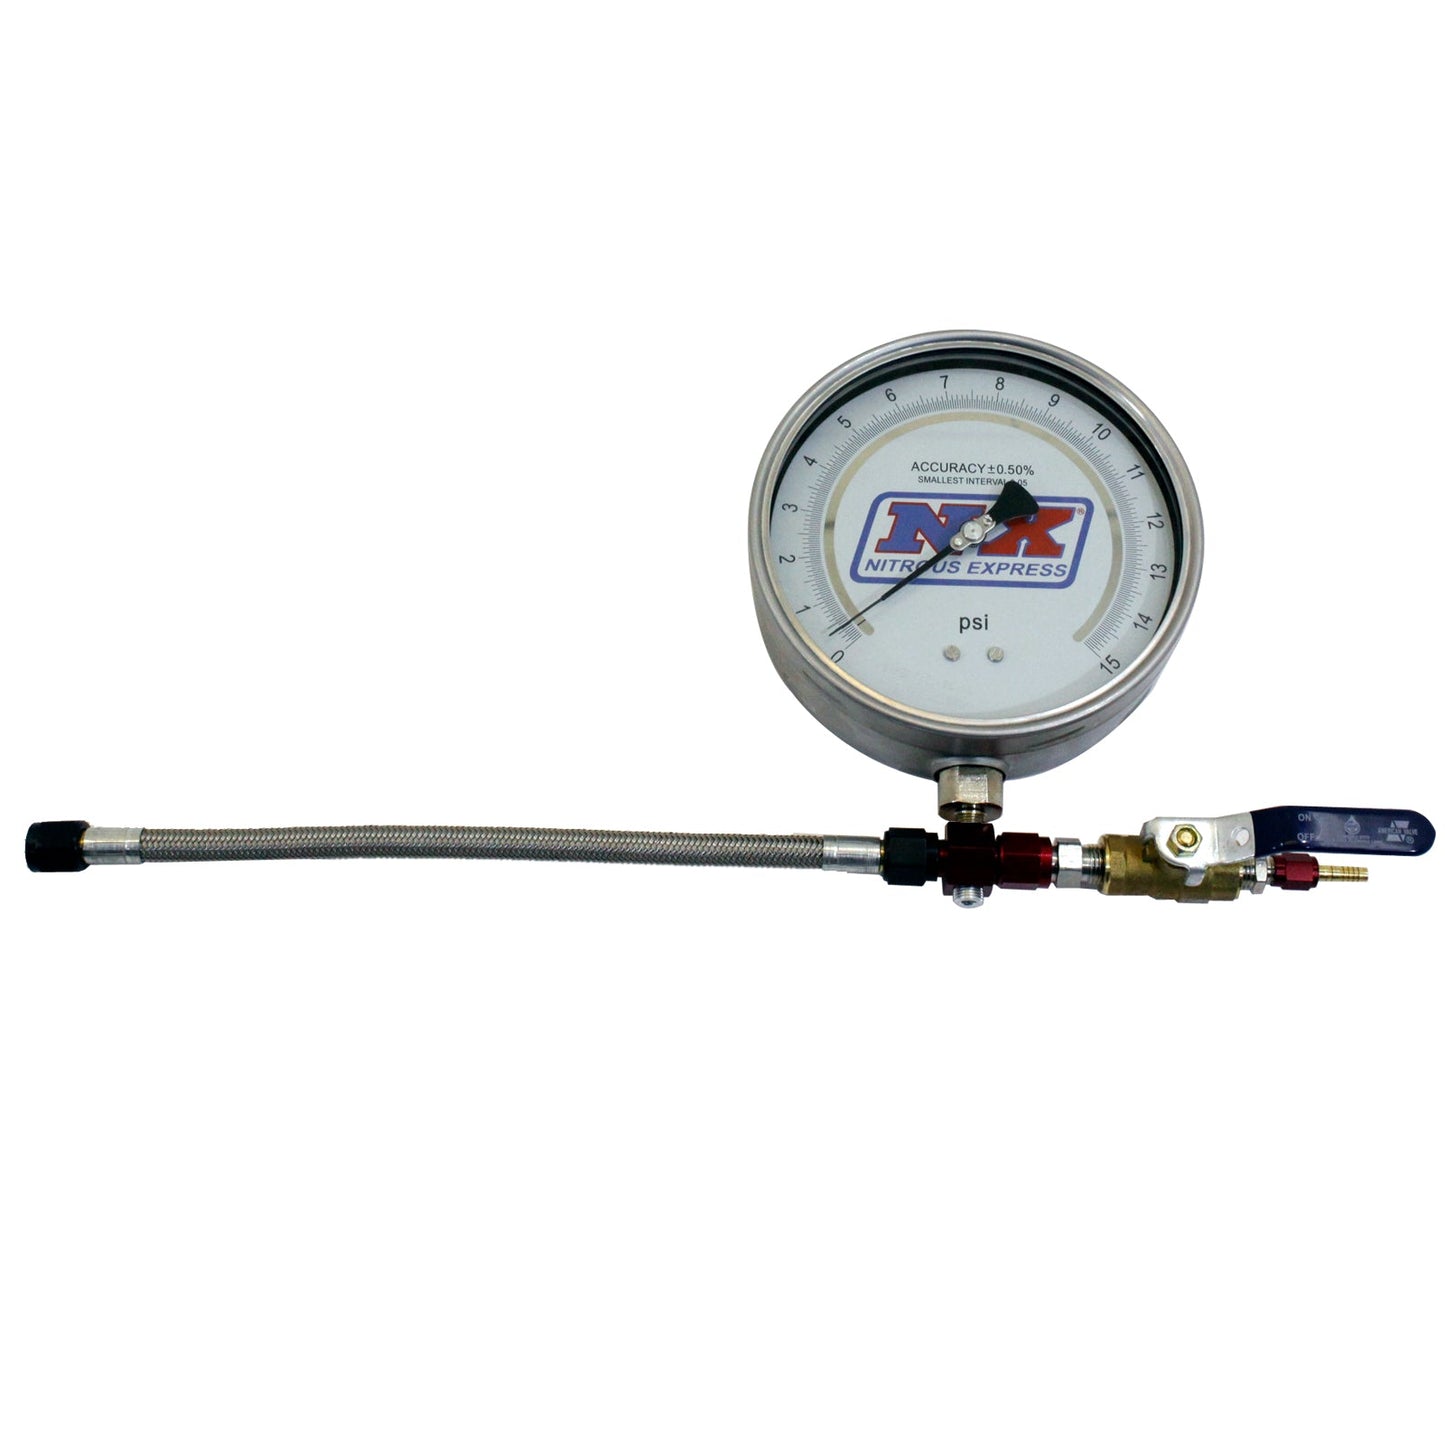 Nitrous Express - Master Flo-Check Pro Nitrous Pressure Check Kit 6" Certified Gauge with Plastic Case (15529)